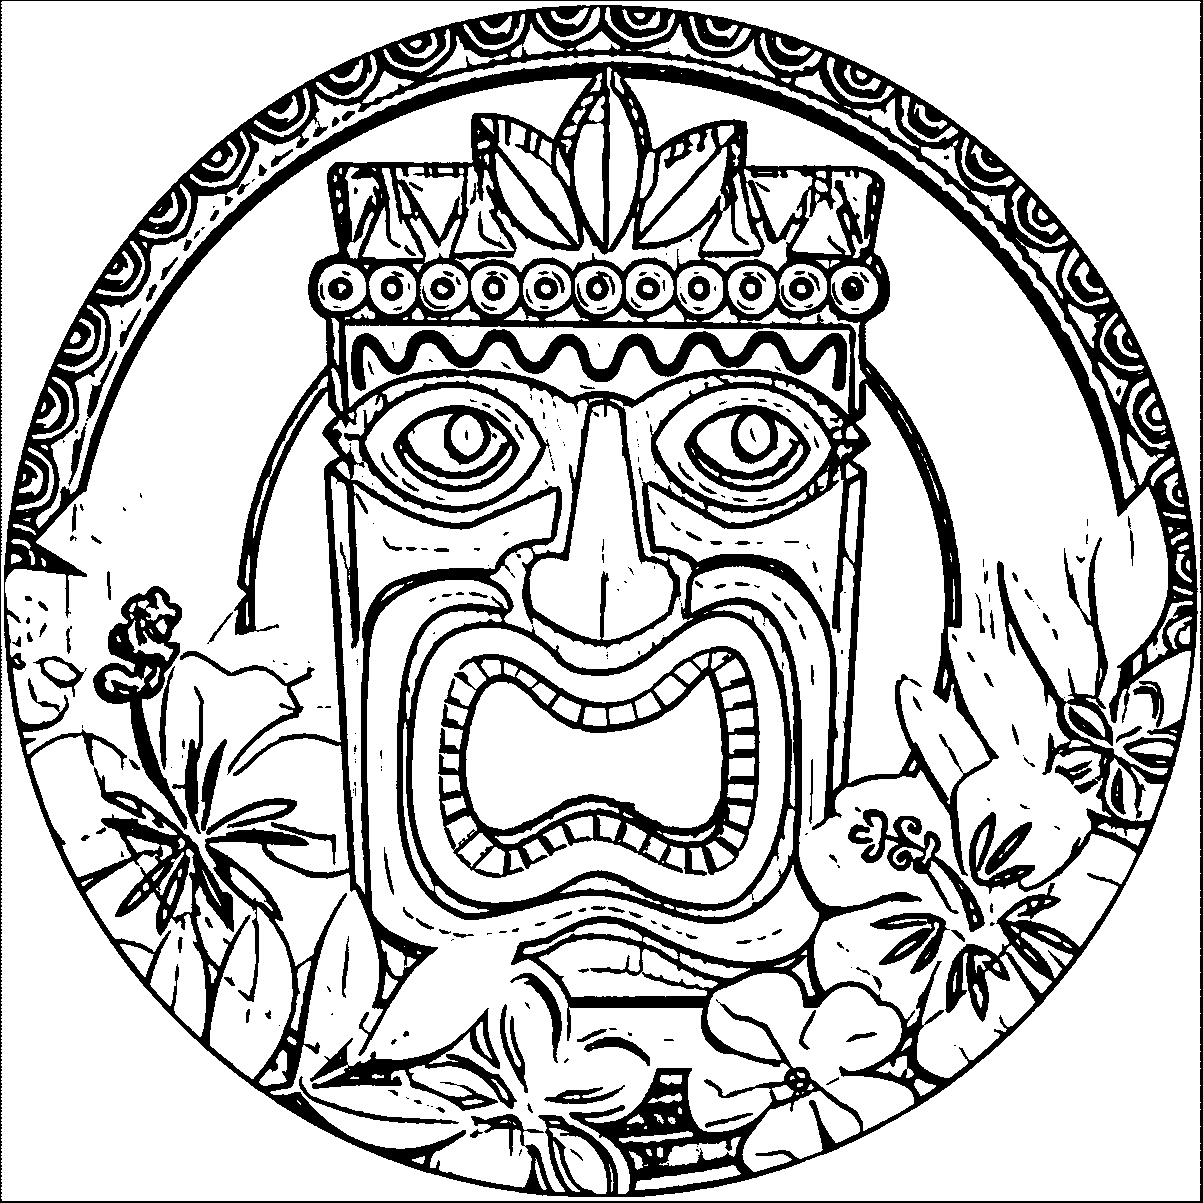 Free Coloring Pages For Hawaii, Download Free Coloring Pages For Hawaii